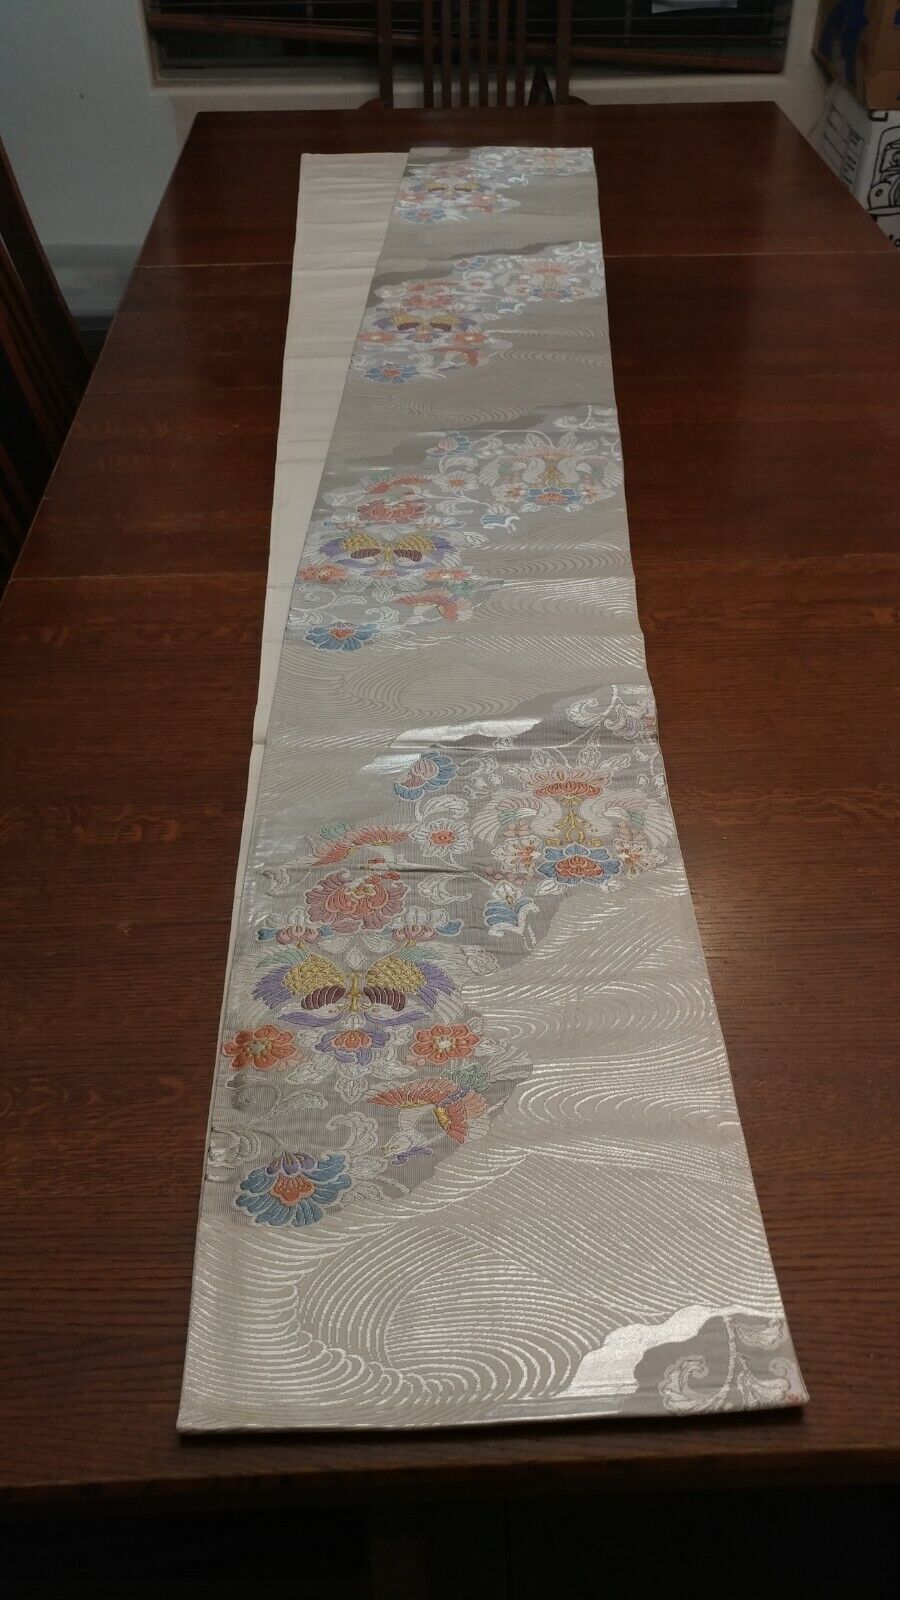 ORIENTAL LOVE BIRDS & FLOWERS LINEN embroidered tapestry Table Runner 166" x 12"